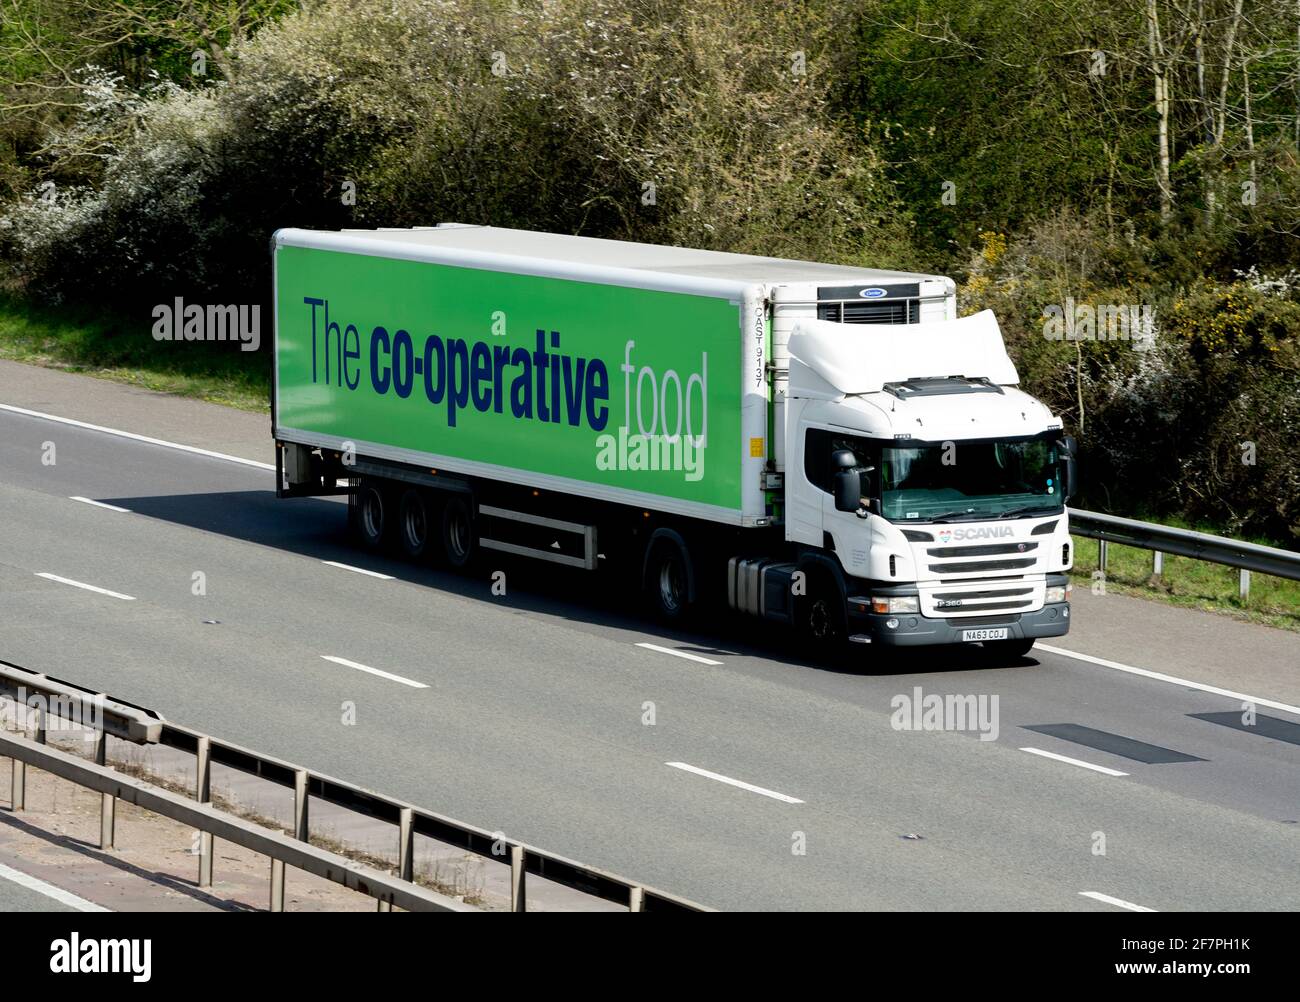 A Scania Co-operative Food lorry on the M40 motorway, Warwickshire, UK Stock Photo